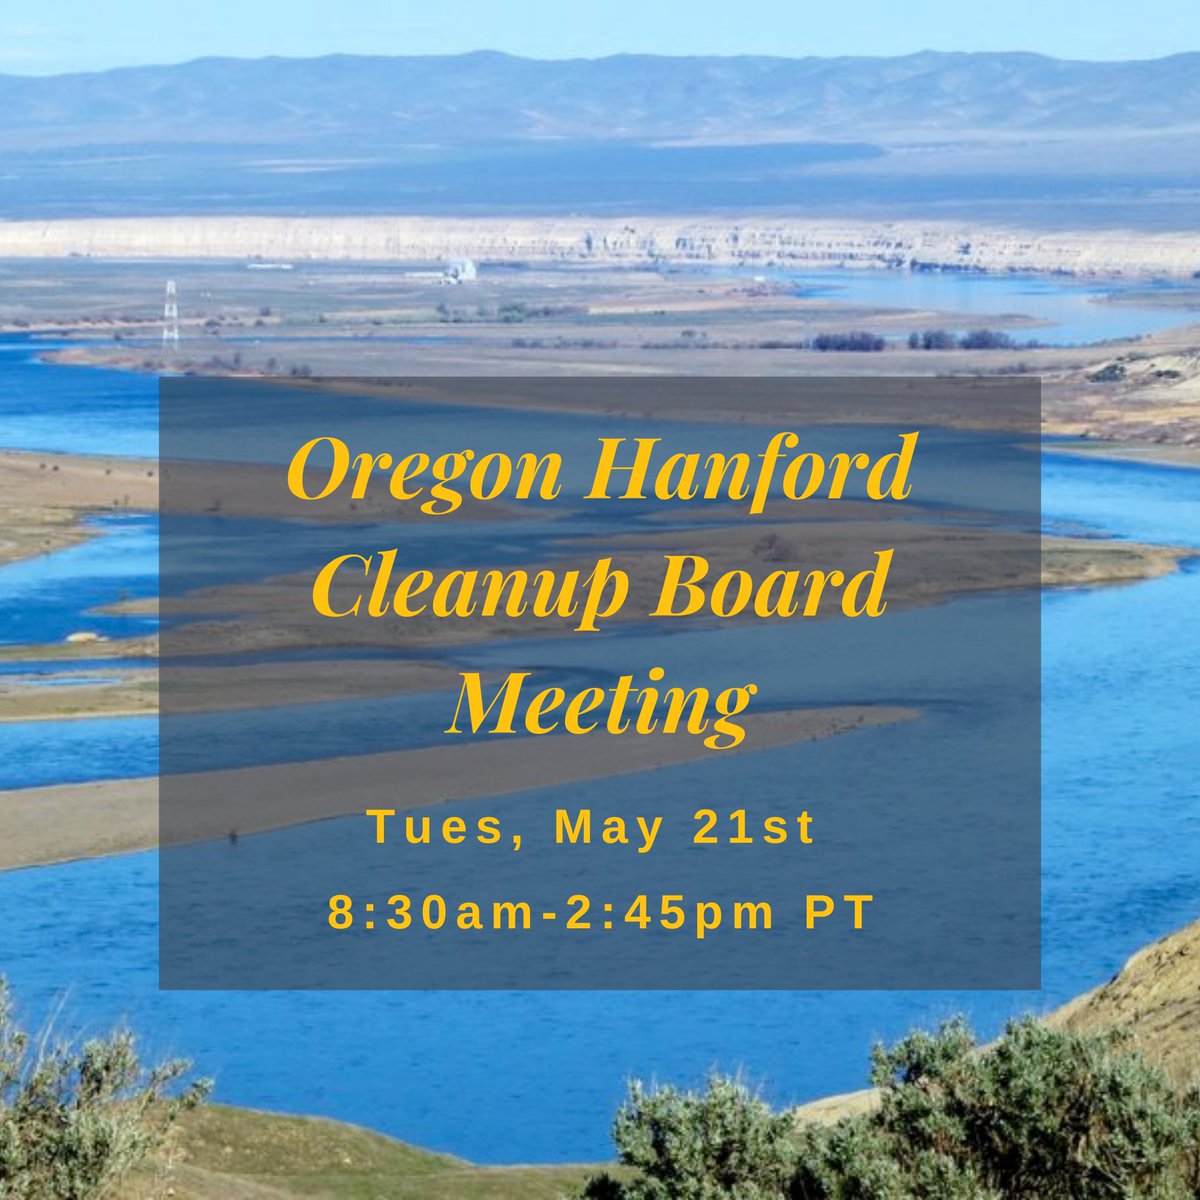 The Oregon Hanford Cleanup Board is meeting next week in Pendleton! Join us from 8:30am-2:45pm in the Tucannon Palouse Room at Wildhorse Casino & Resort or virtually via Teams. Meeting agenda & info: bit.ly/4bcKmK2